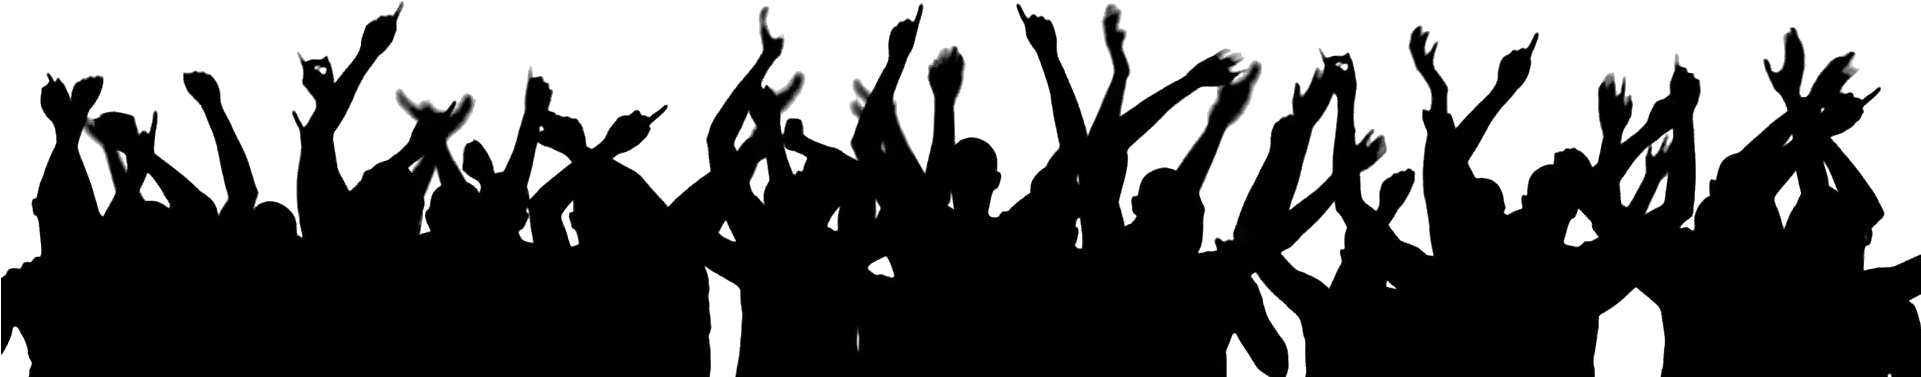 Concert Crowd Silhouette.png PNG